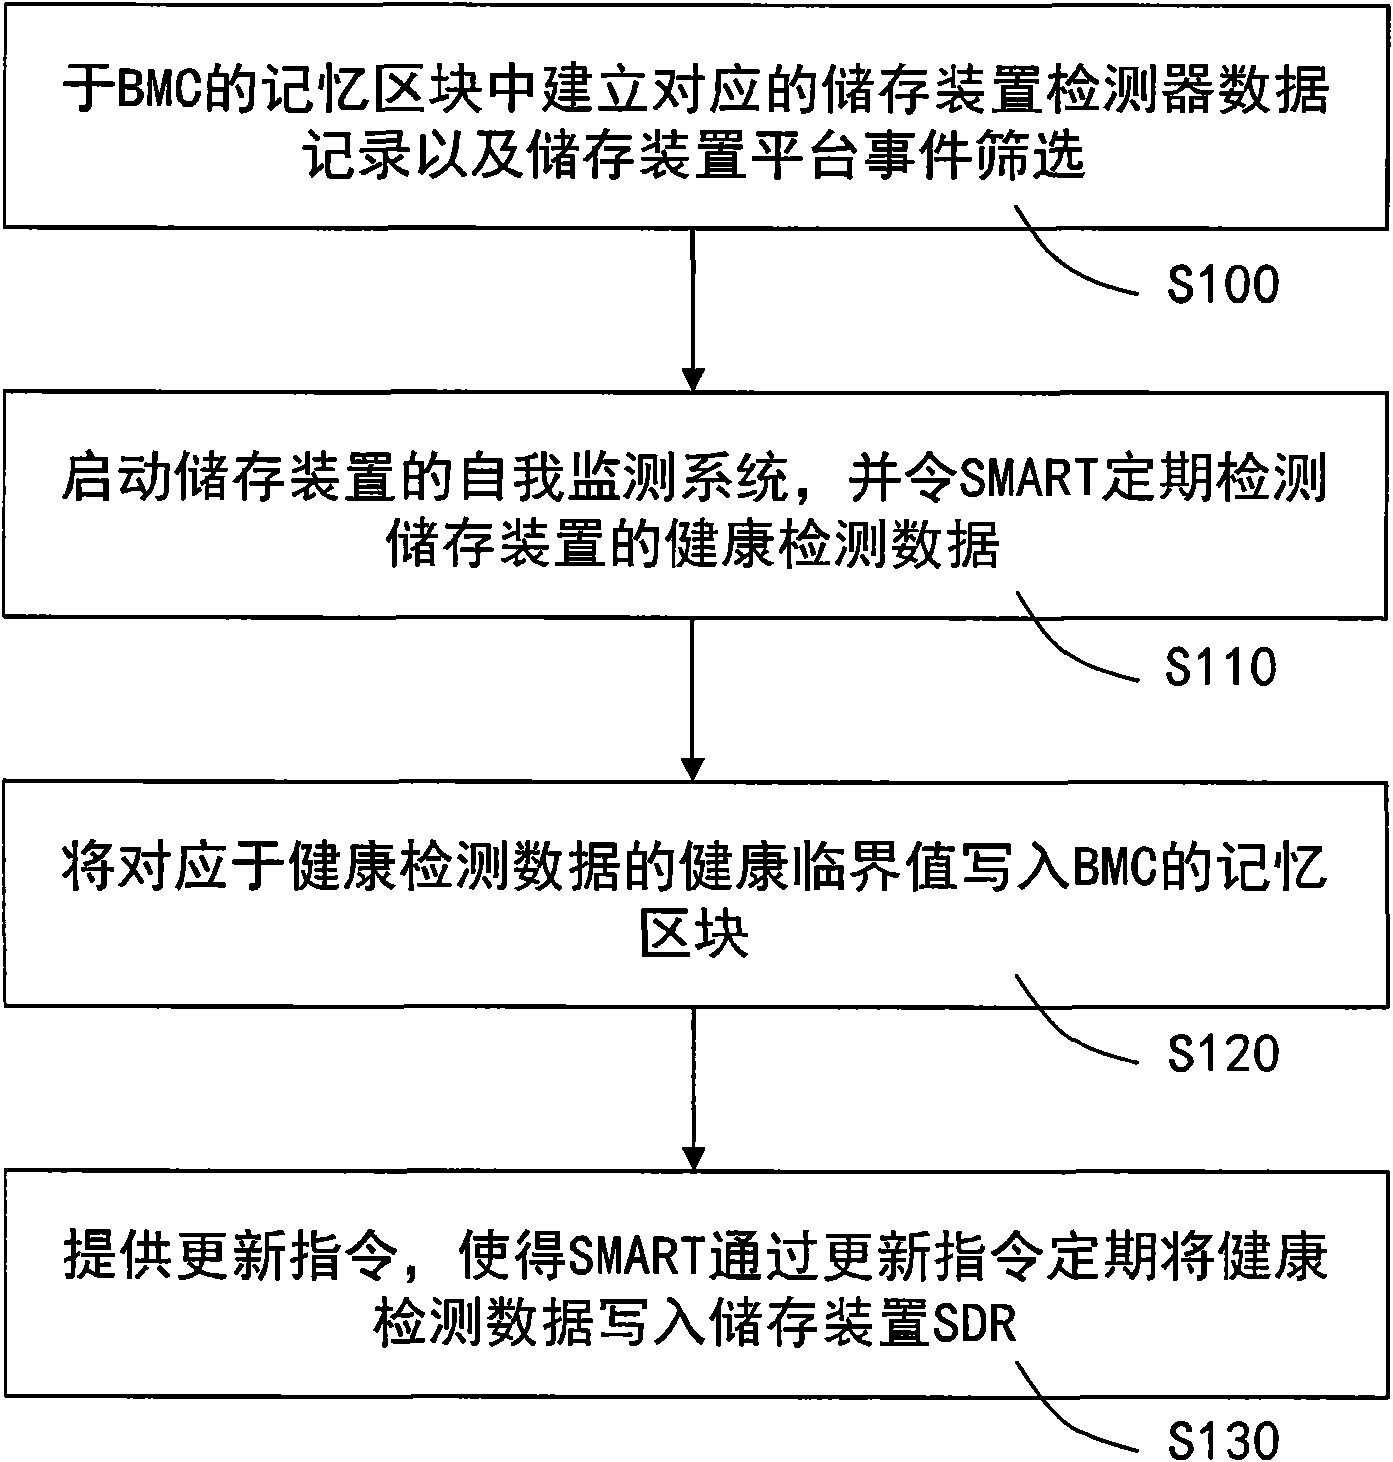 Method for obtaining fault signal of storage device by baseboard management controller